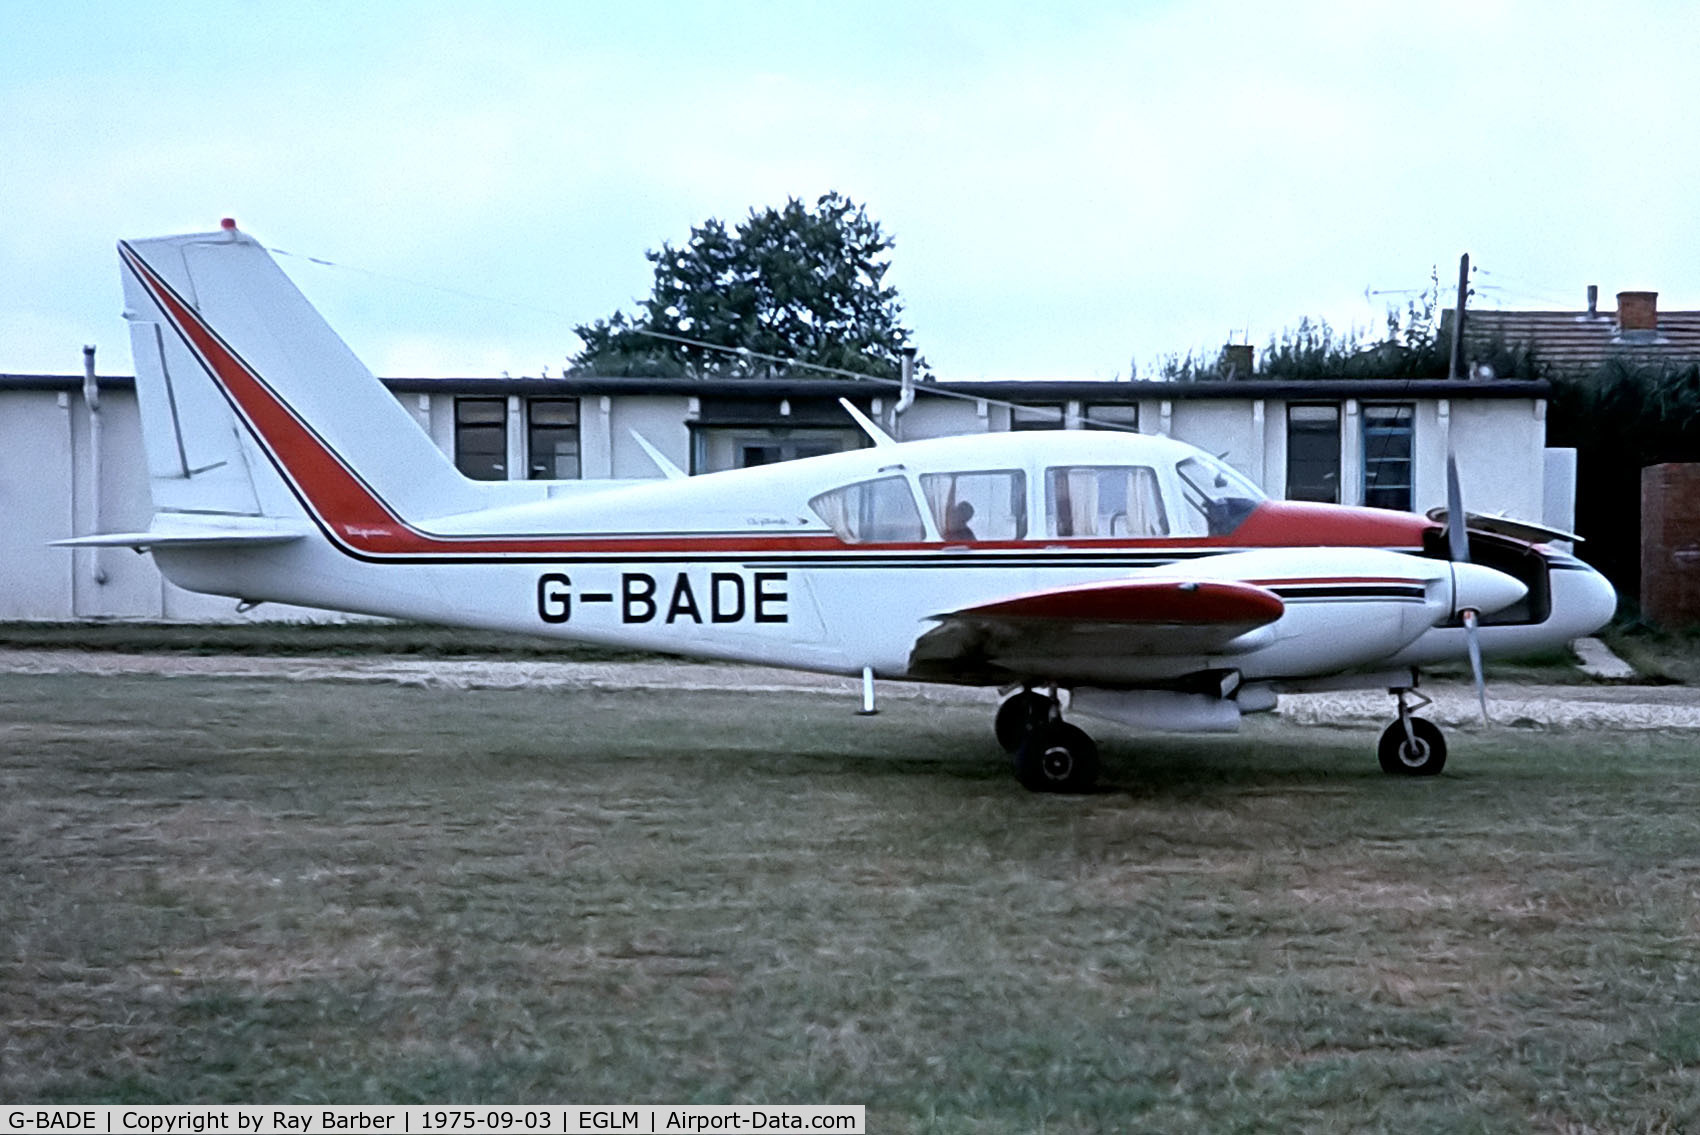 G-BADE, 1969 Piper PA-23-250 Aztec C/N 27-4205, Piper PA-23-250 Aztec D [27-4205] White Waltham~G 03/09/1975. From a slide.